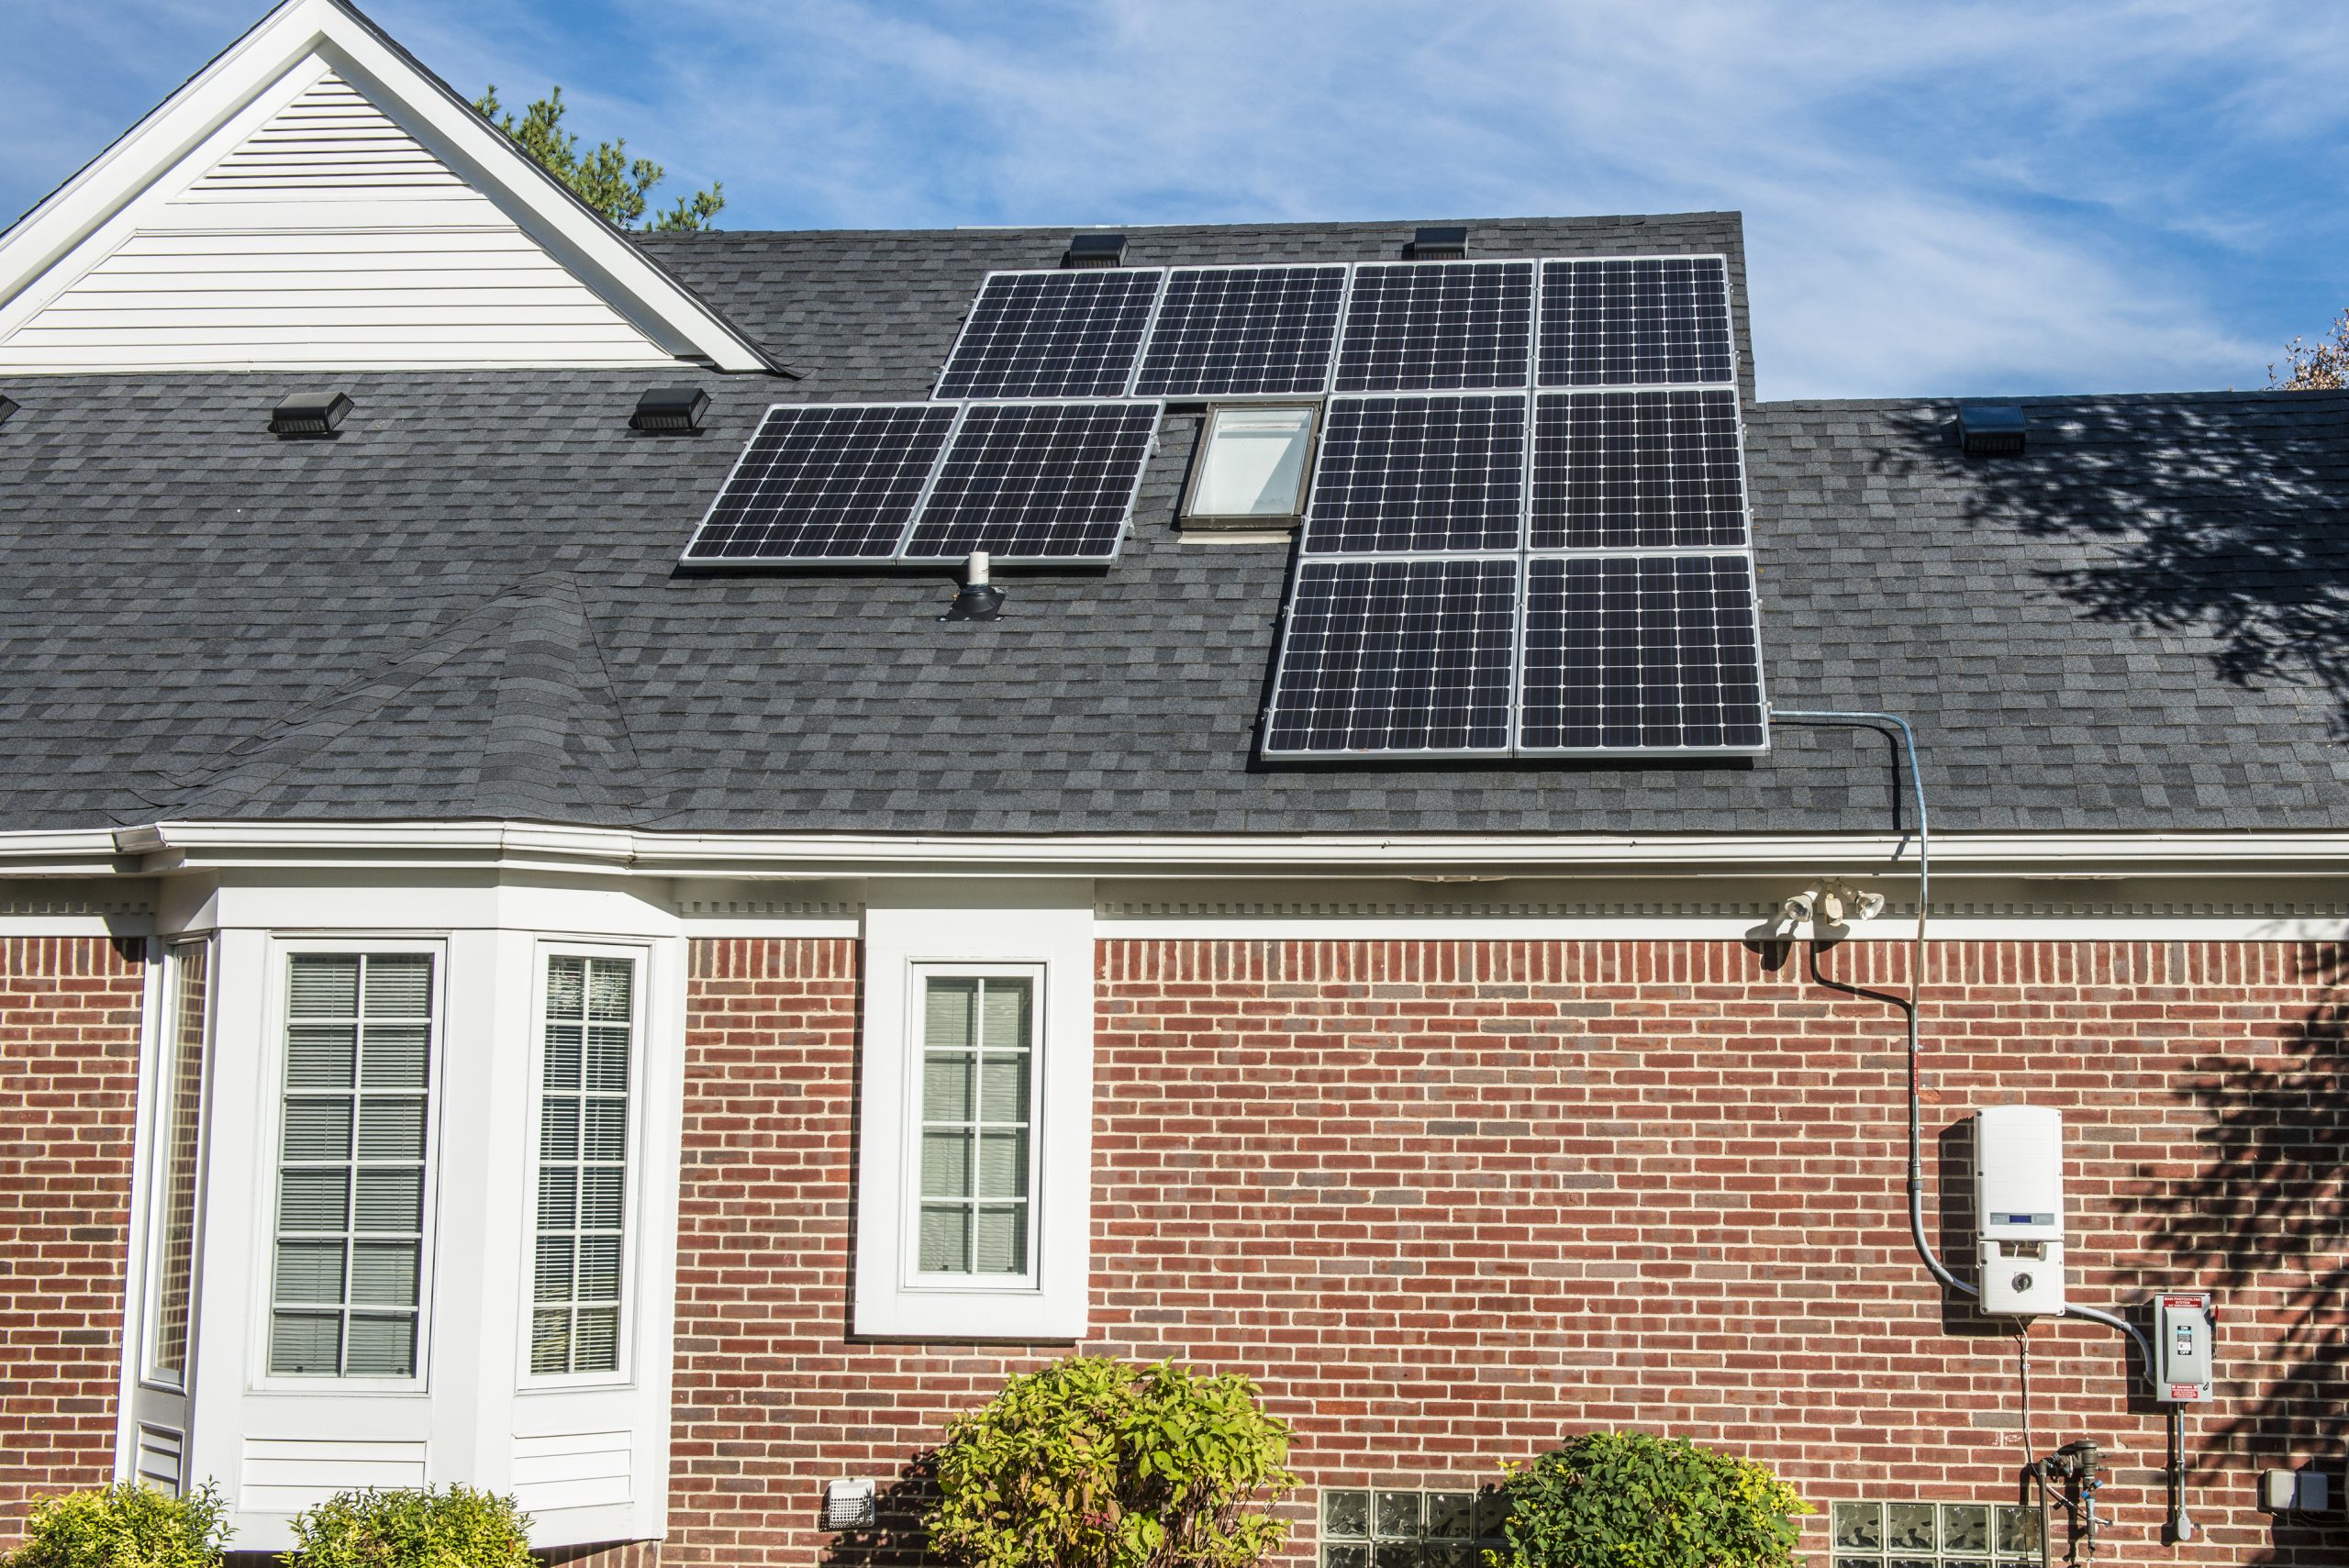 When you Want to have Solar Panels Installed in Your Home in or Near Dallas, Texas